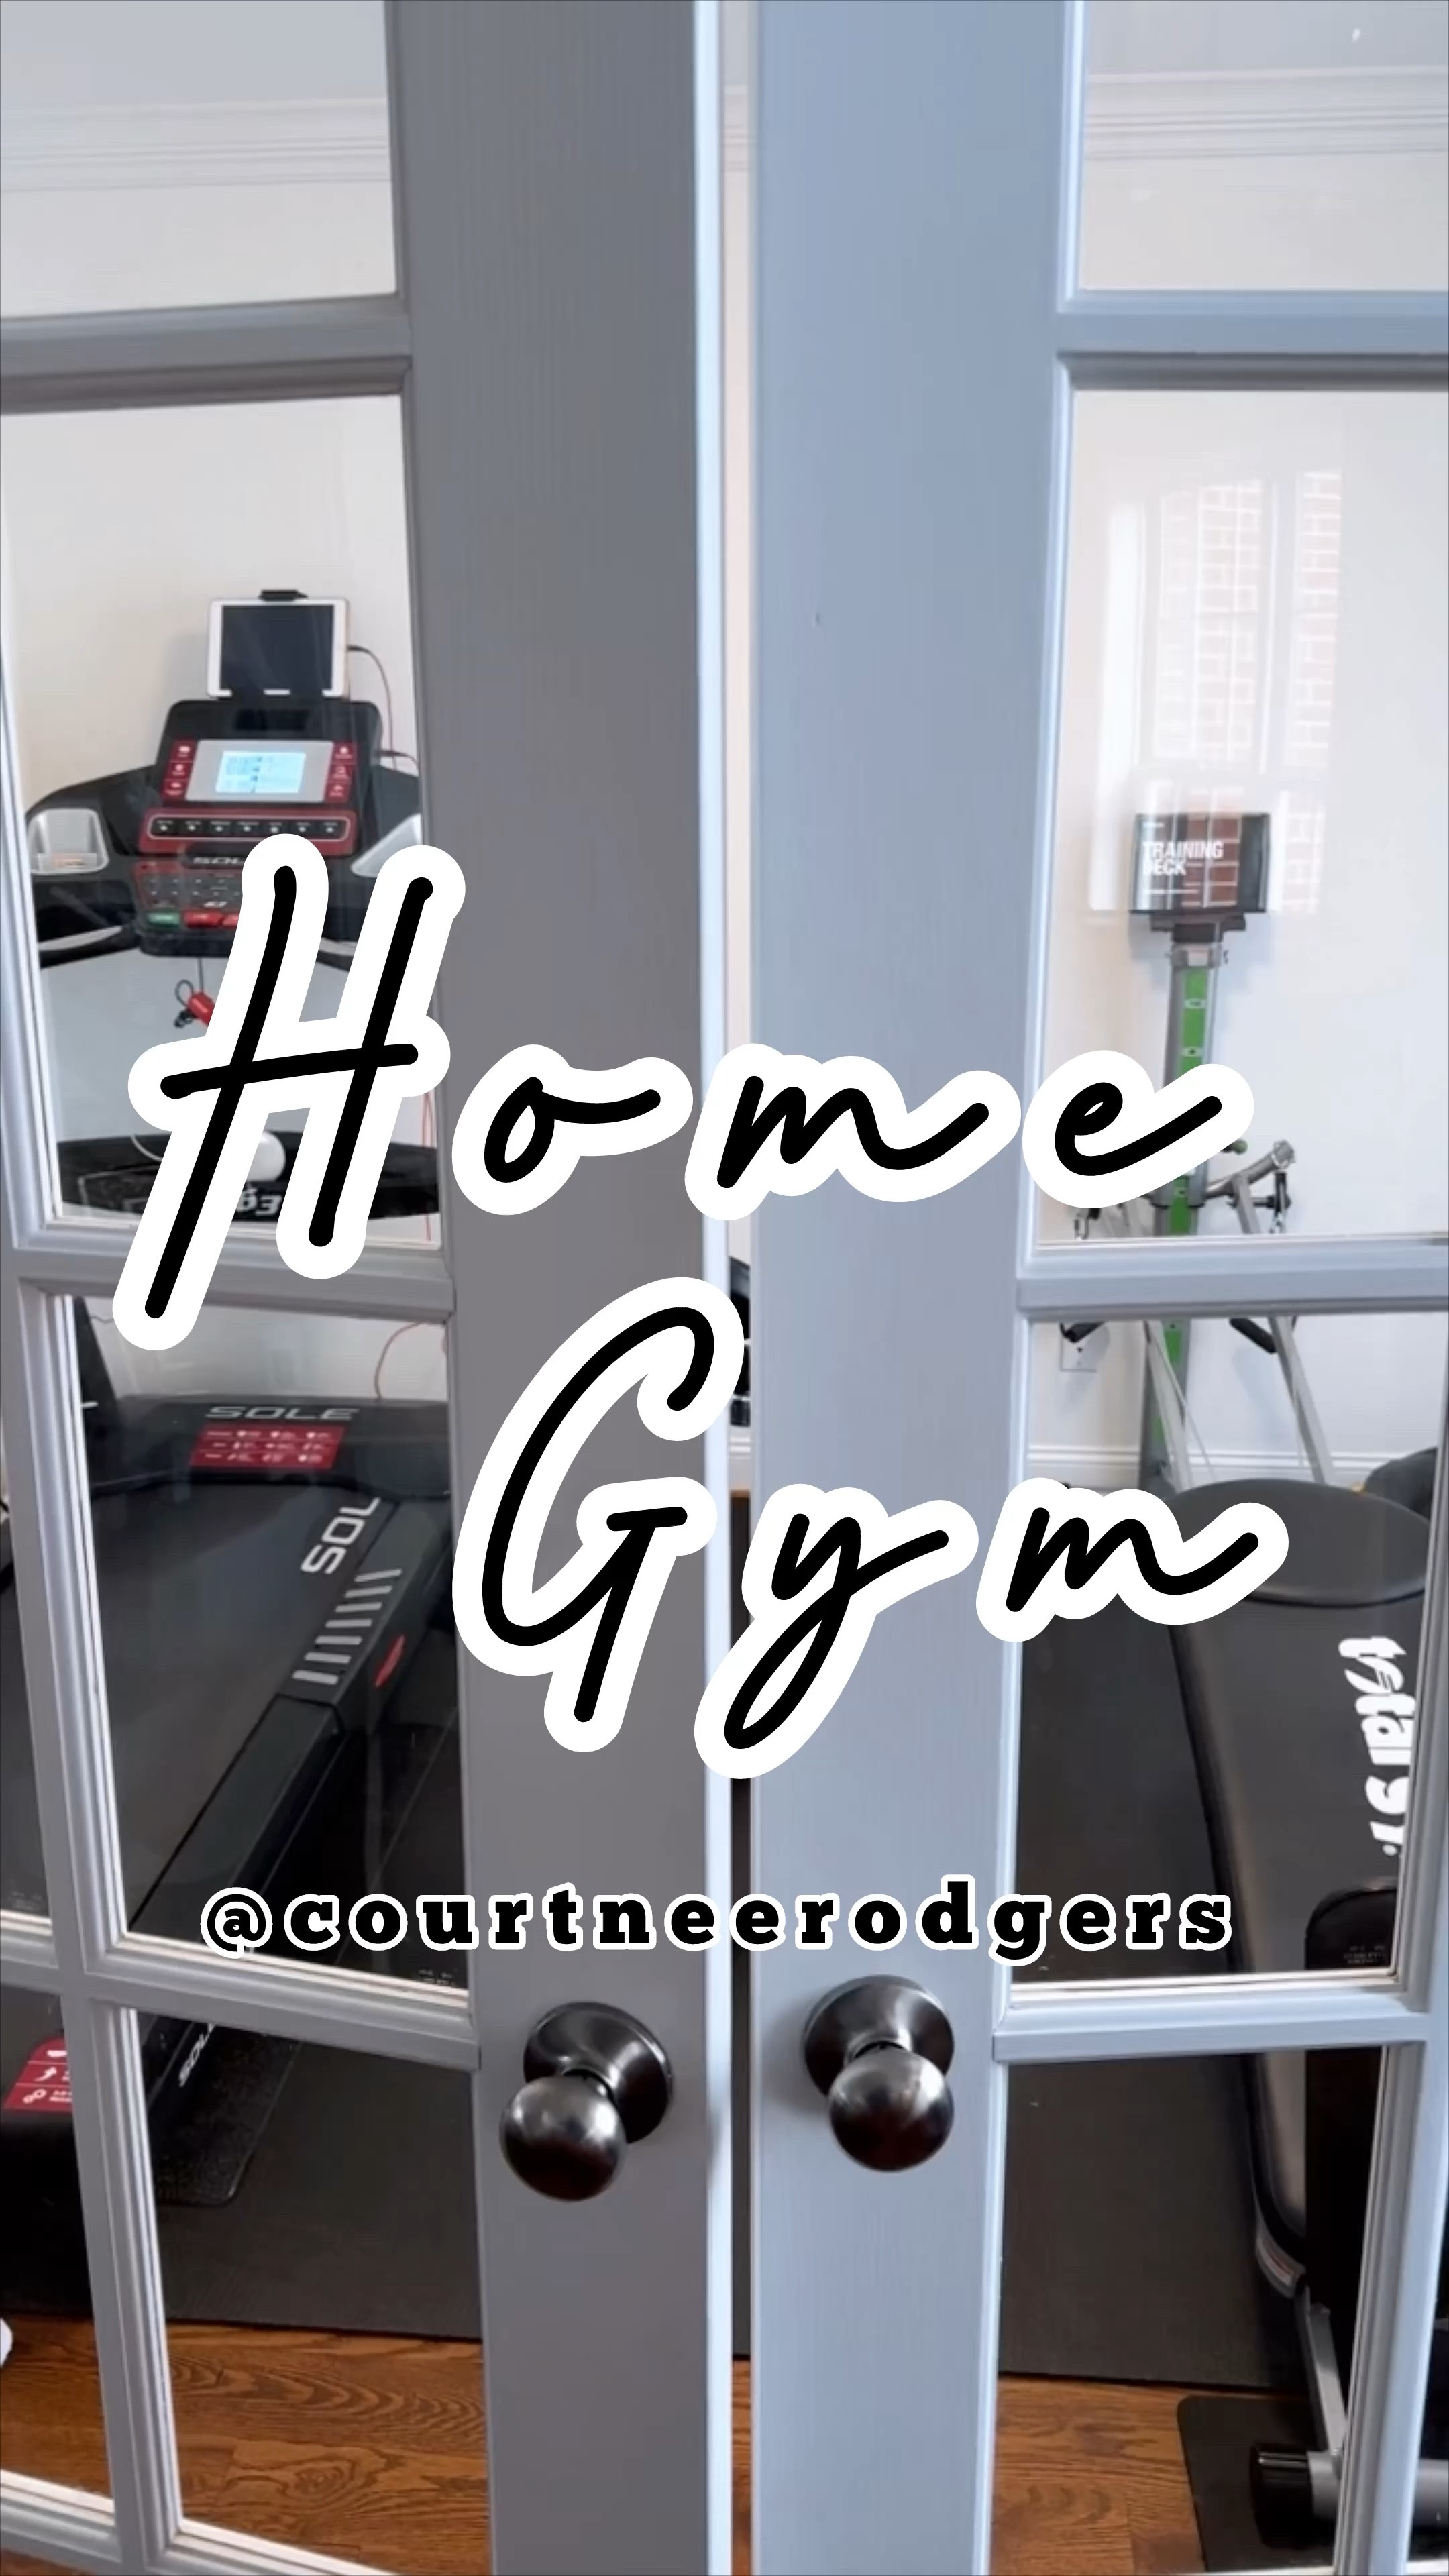 Total Gym Apex G1, G3, G5 Versatile Indoor Home Workout Total Body